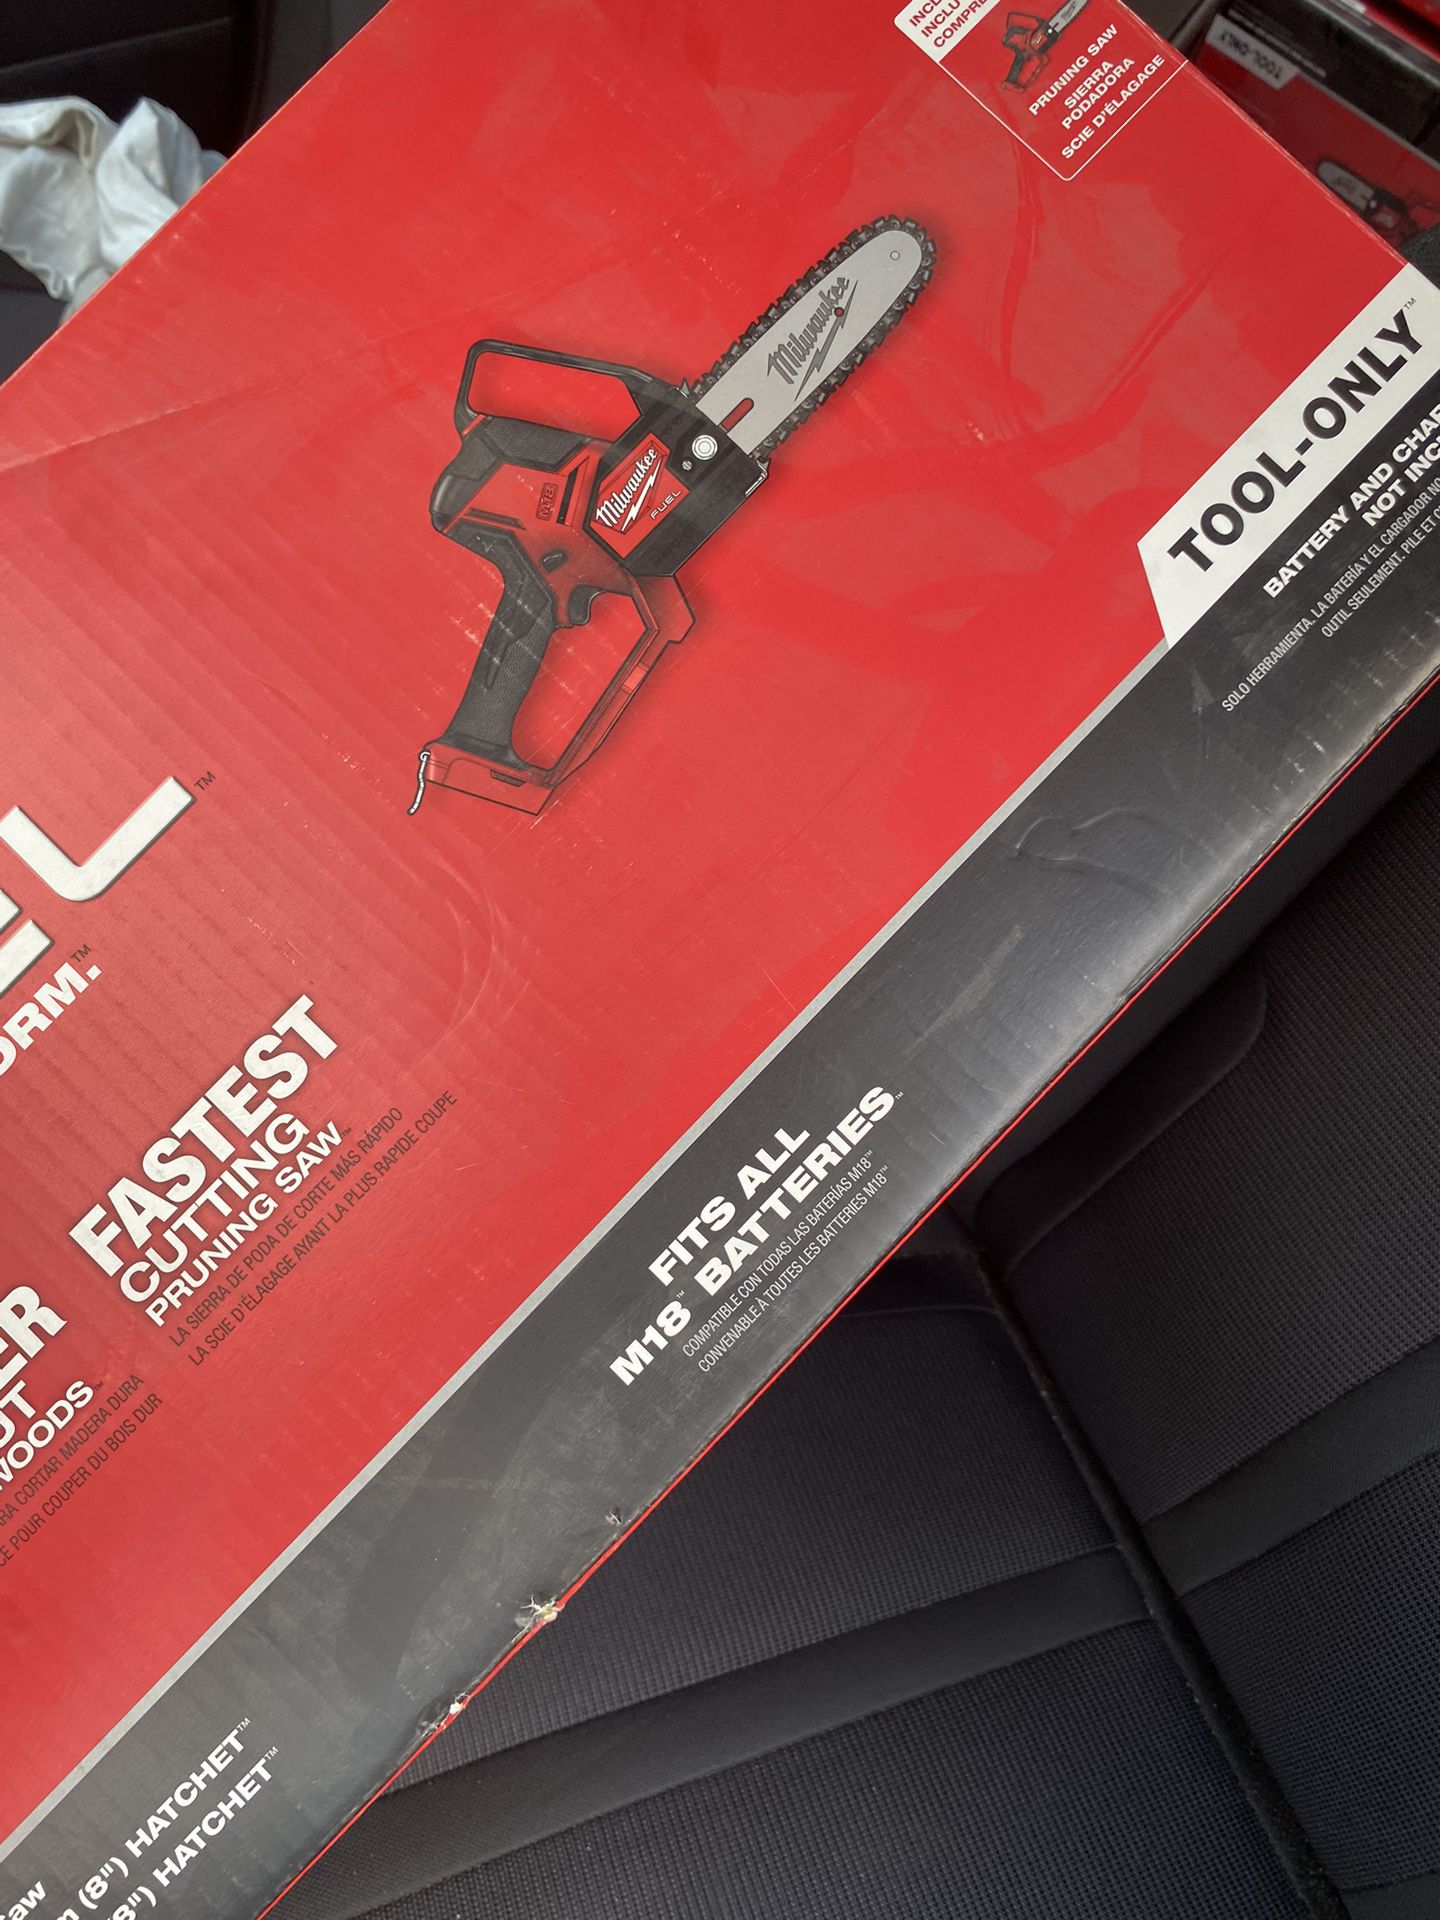 Milwaukee This Tool Cost $279 Plus Tax At Home Depot You Want It For Less Go Buy At Home Depot 